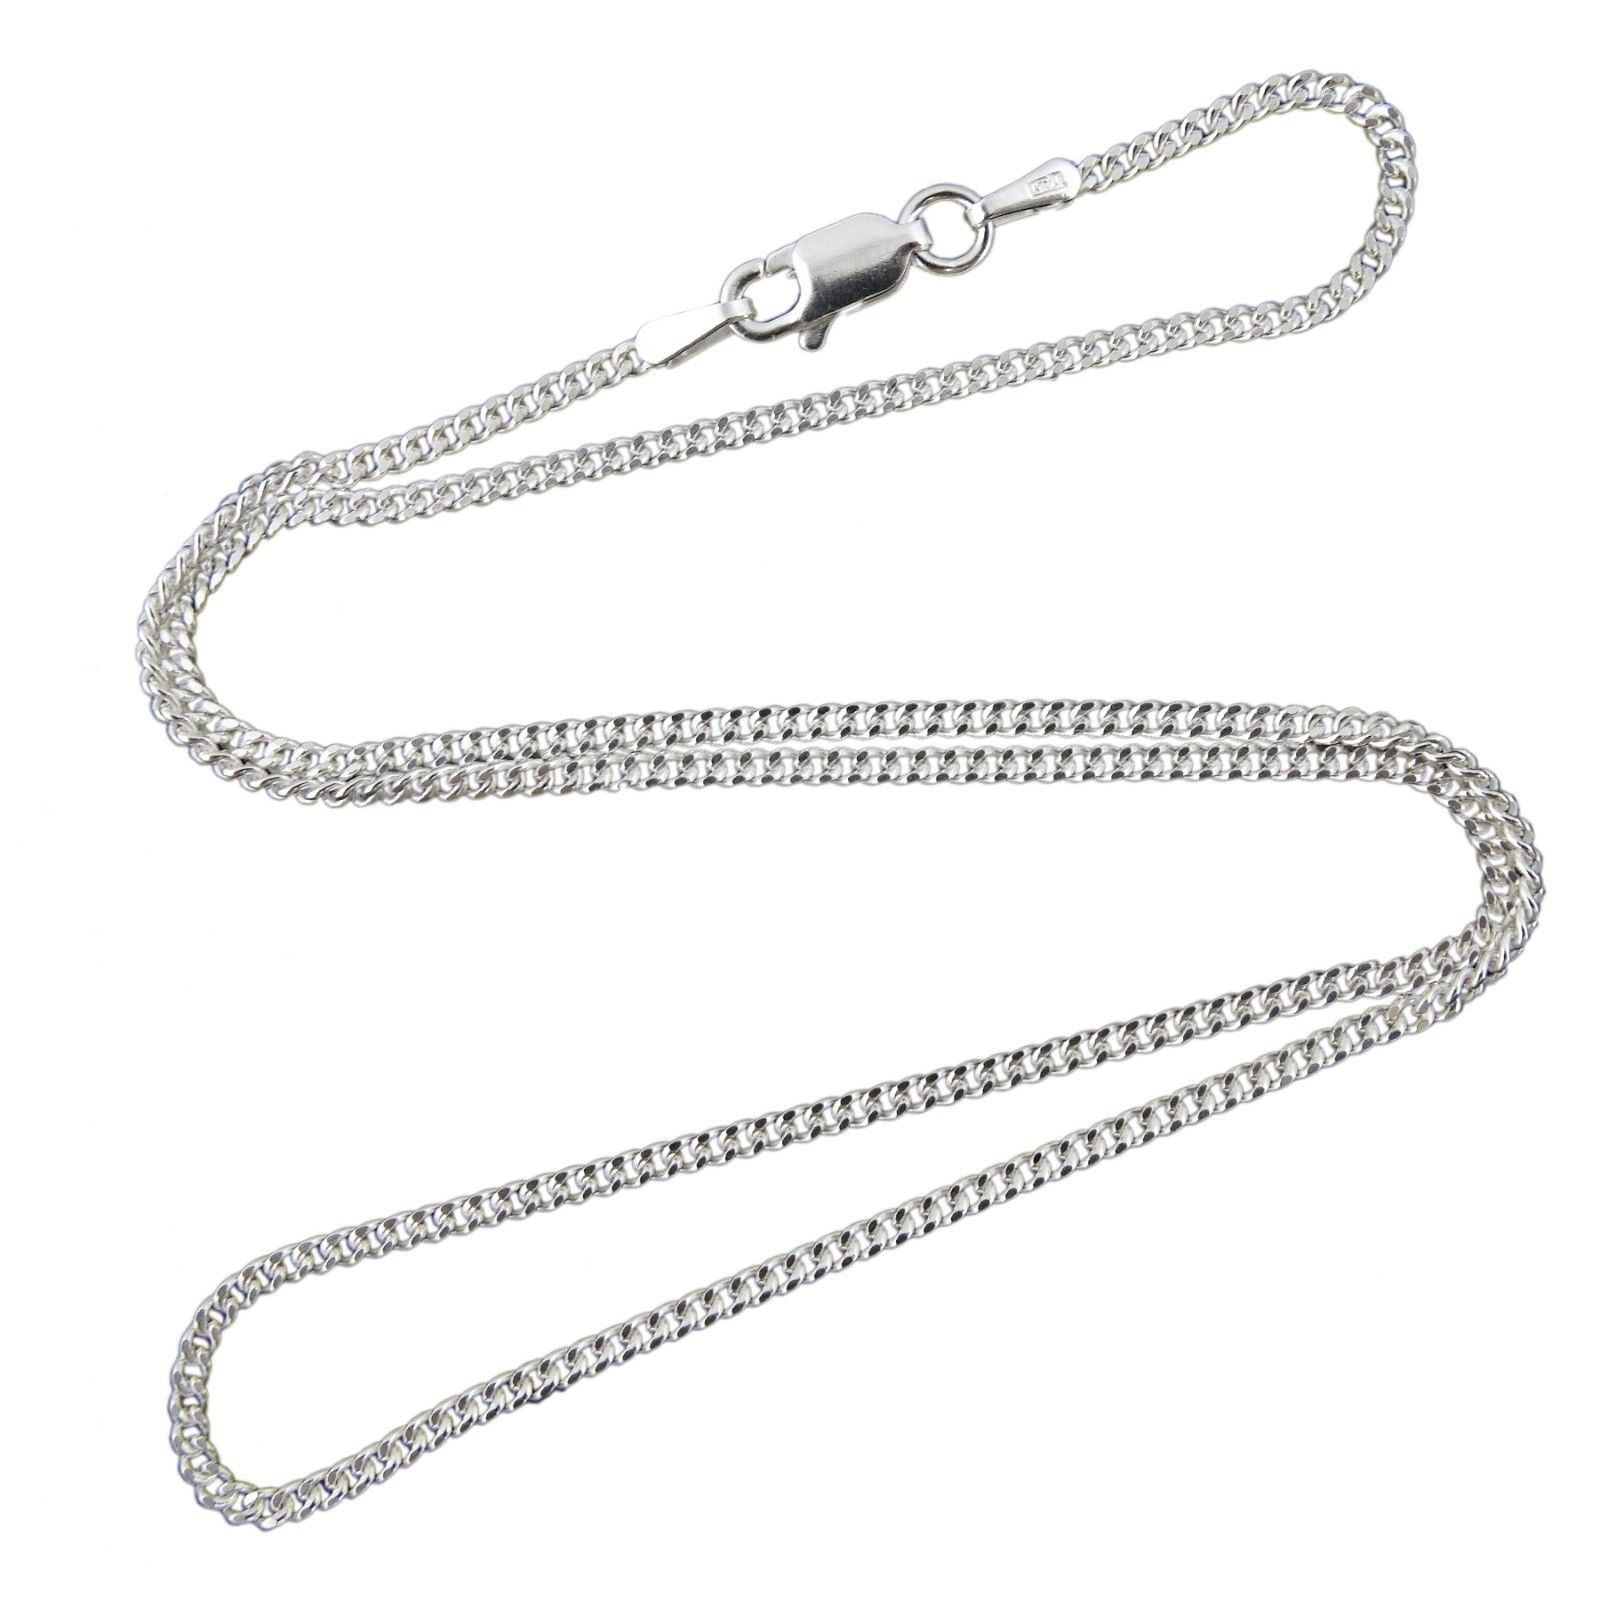 925 Sterling Silver Snake Chain Necklace 3MM 16'', Jewelry 18'',  20'',22'',24'' Stunning